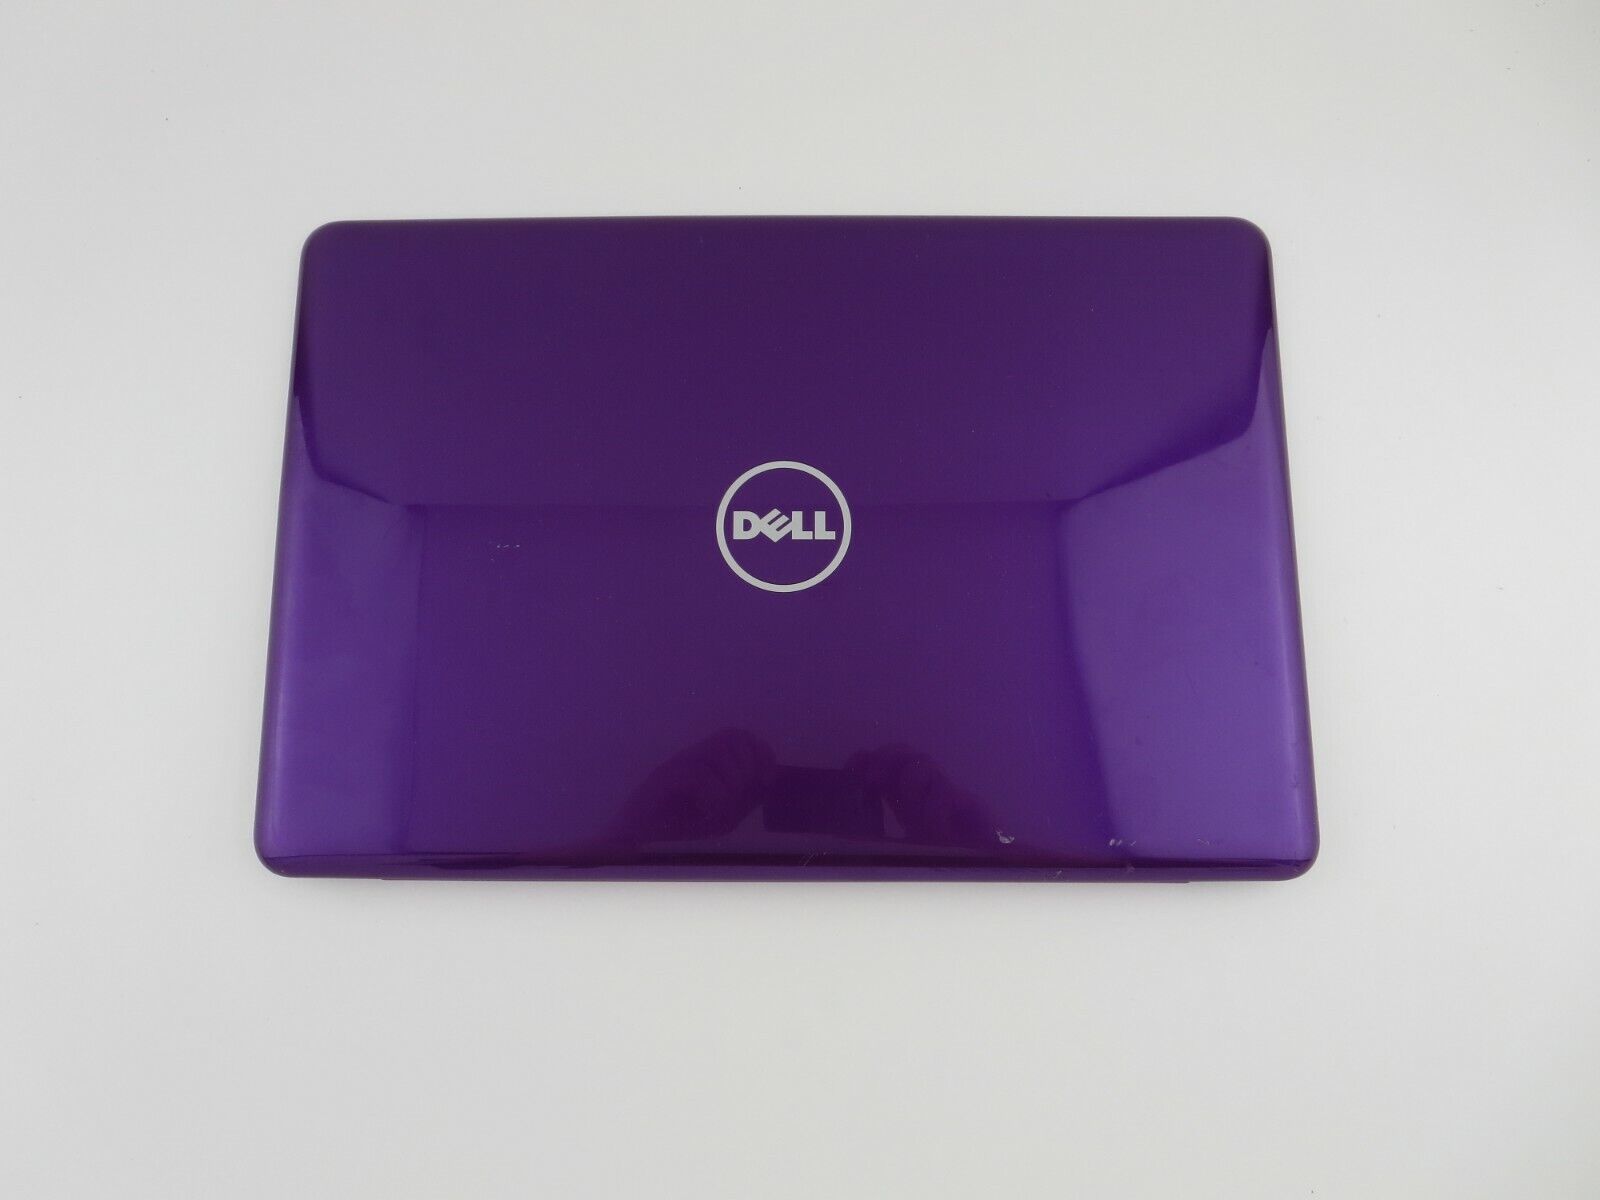 Primary image for Dell Inspiron 15 5565 / 5567 Purple Lcd Back Cover Lid - M95VW 0M95VW 519